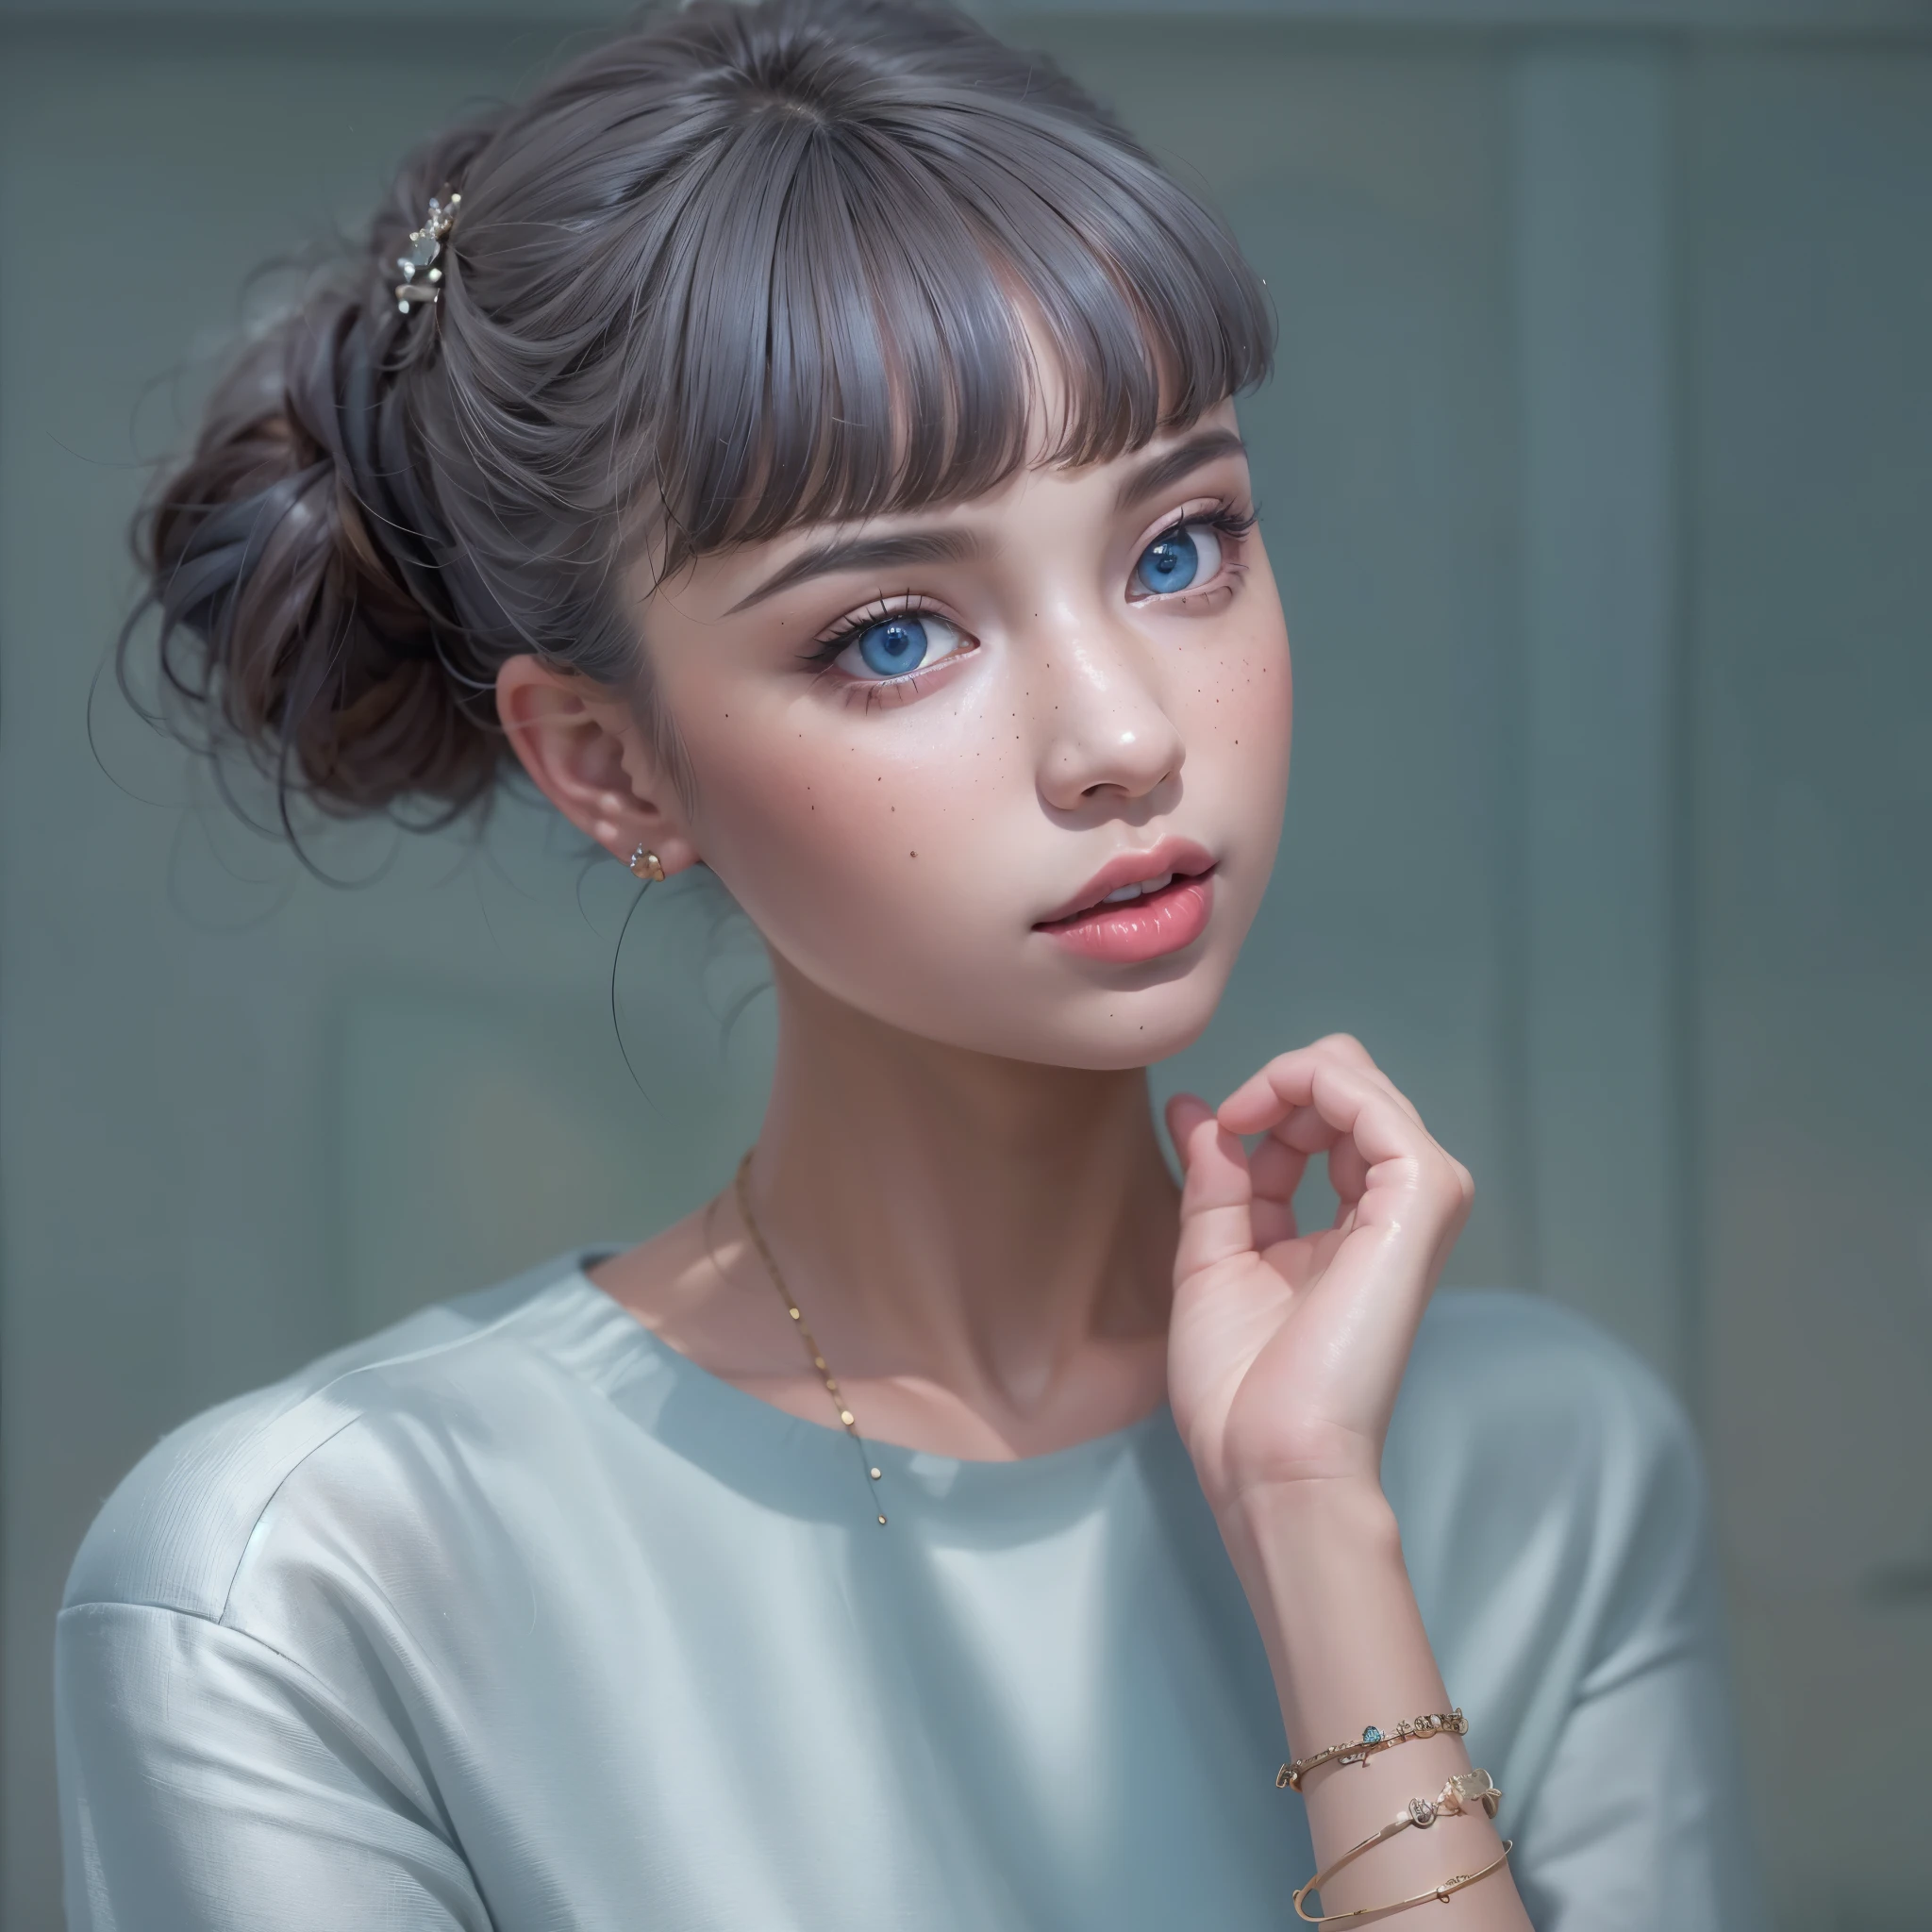 very beautiful, well-groomed girl, With clean skin, normal functions, Beautiful lips, and a slight smile on her face. beautiful figure, modern clothes, cool modern couture dress. presentation background, neutral gray-blue, in virtual space. top quality, 16 thousand.. Full HD, Cinematic rendering. Create a work of art, conveying the unique beauty of baby Michela.., Famous digital influencer. Focus on her unique facial expression, when she looks directly at the camera., trying to capture the intensity of her piercing blue eyes. Channel her signature style with a Spanish-style hairstyle., styled with two carefully crafted hairpieces.. Add details, reflecting her charming and avant-garde personality.. We took care of that, to convey an aura of modernity and originality, which characterizes Lil Miquela in the digital world. ., Some freckles and nevi, and short hair, wrapped